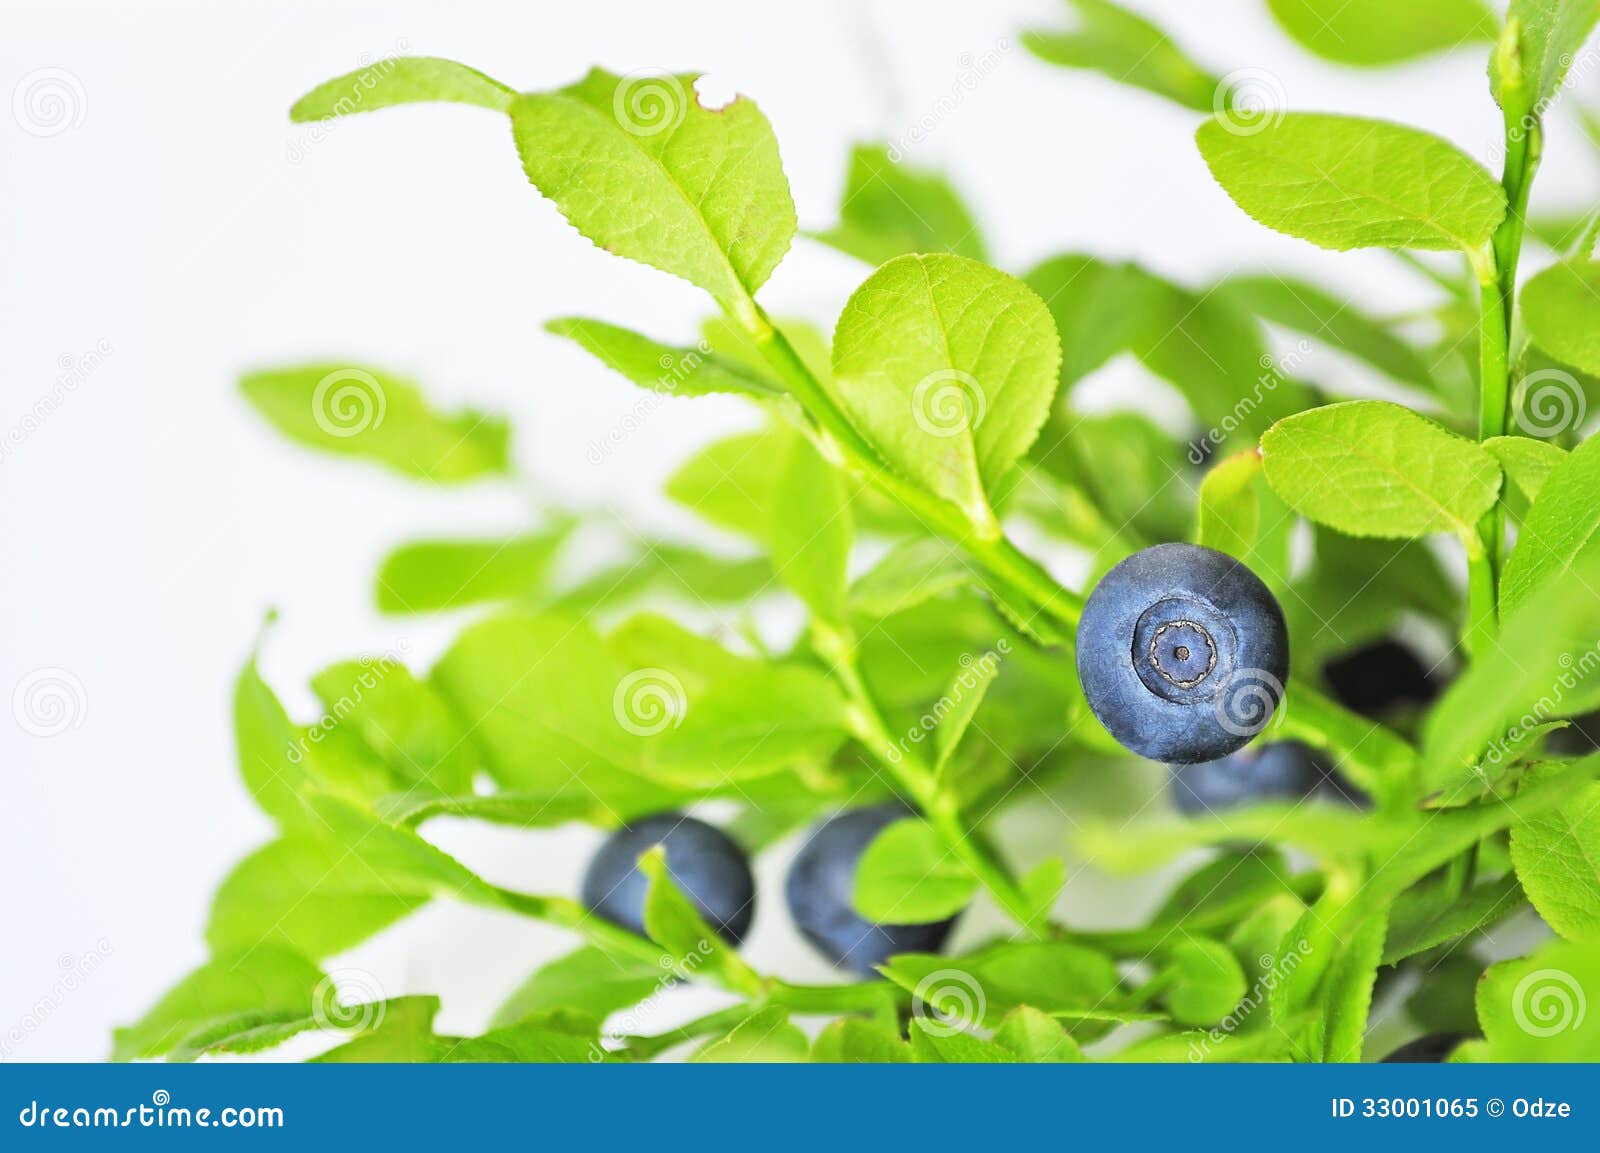 uncultivated huckleberry